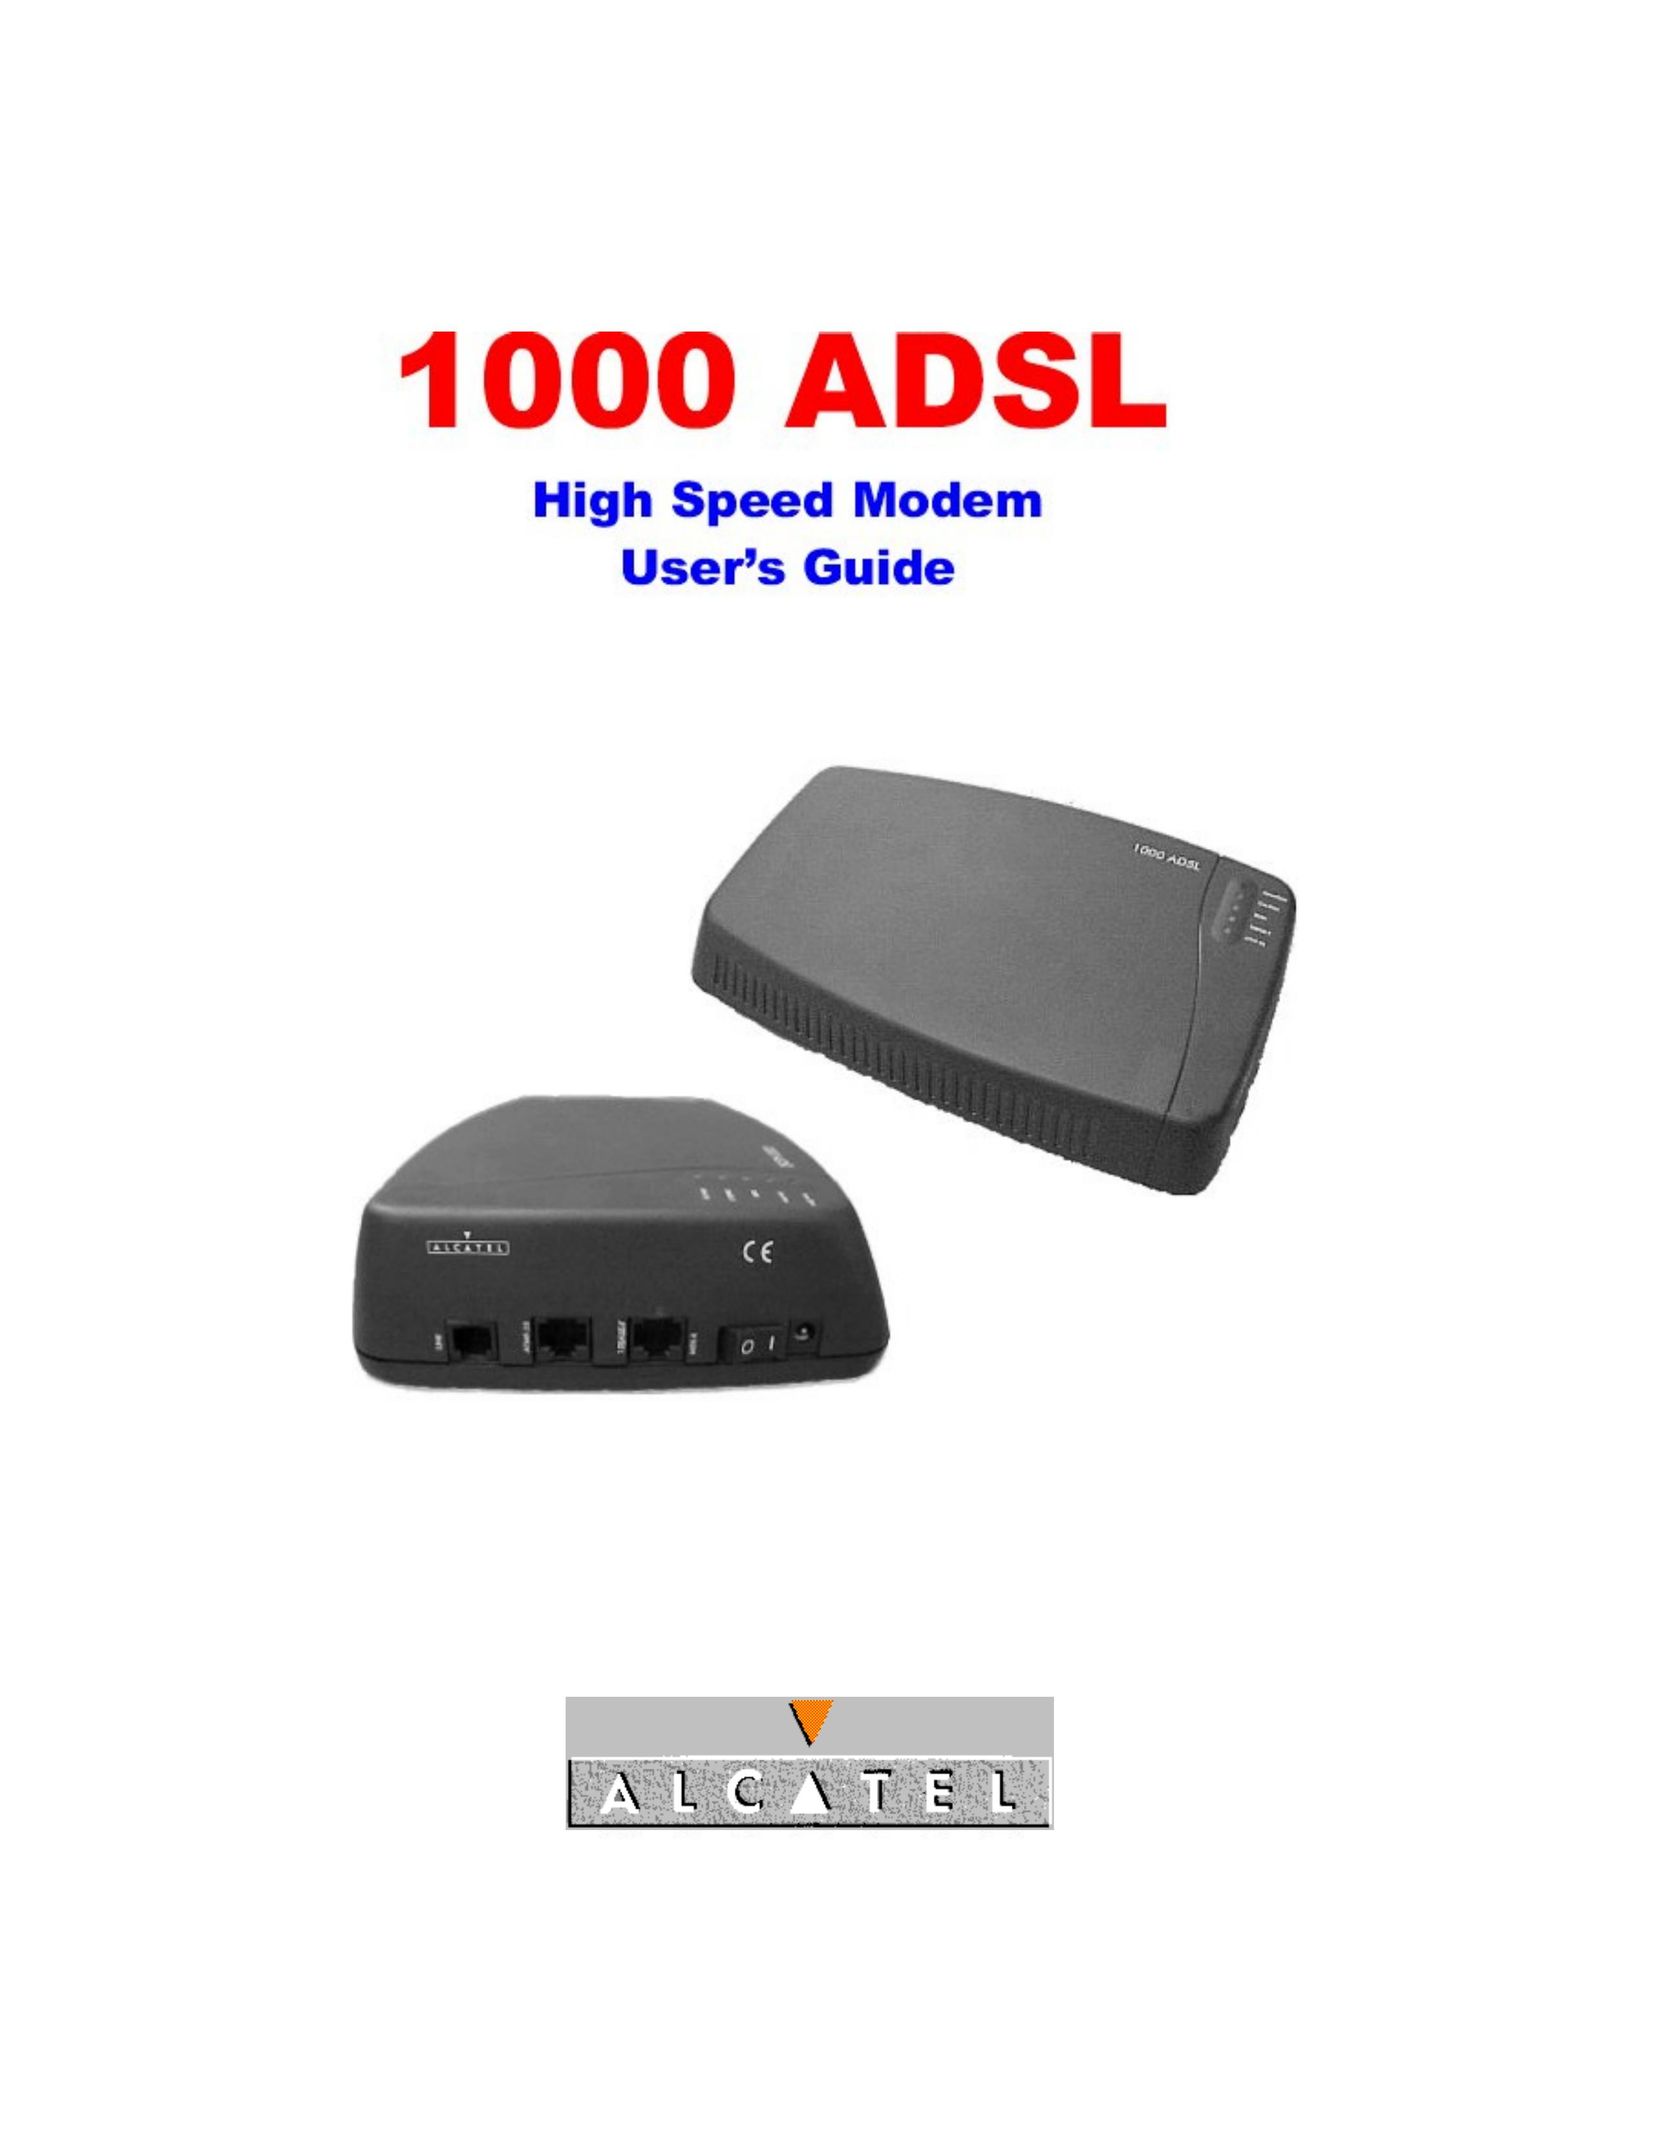 Alcatel Carrier Internetworking Solutions 1000 ADSL Network Card User Manual